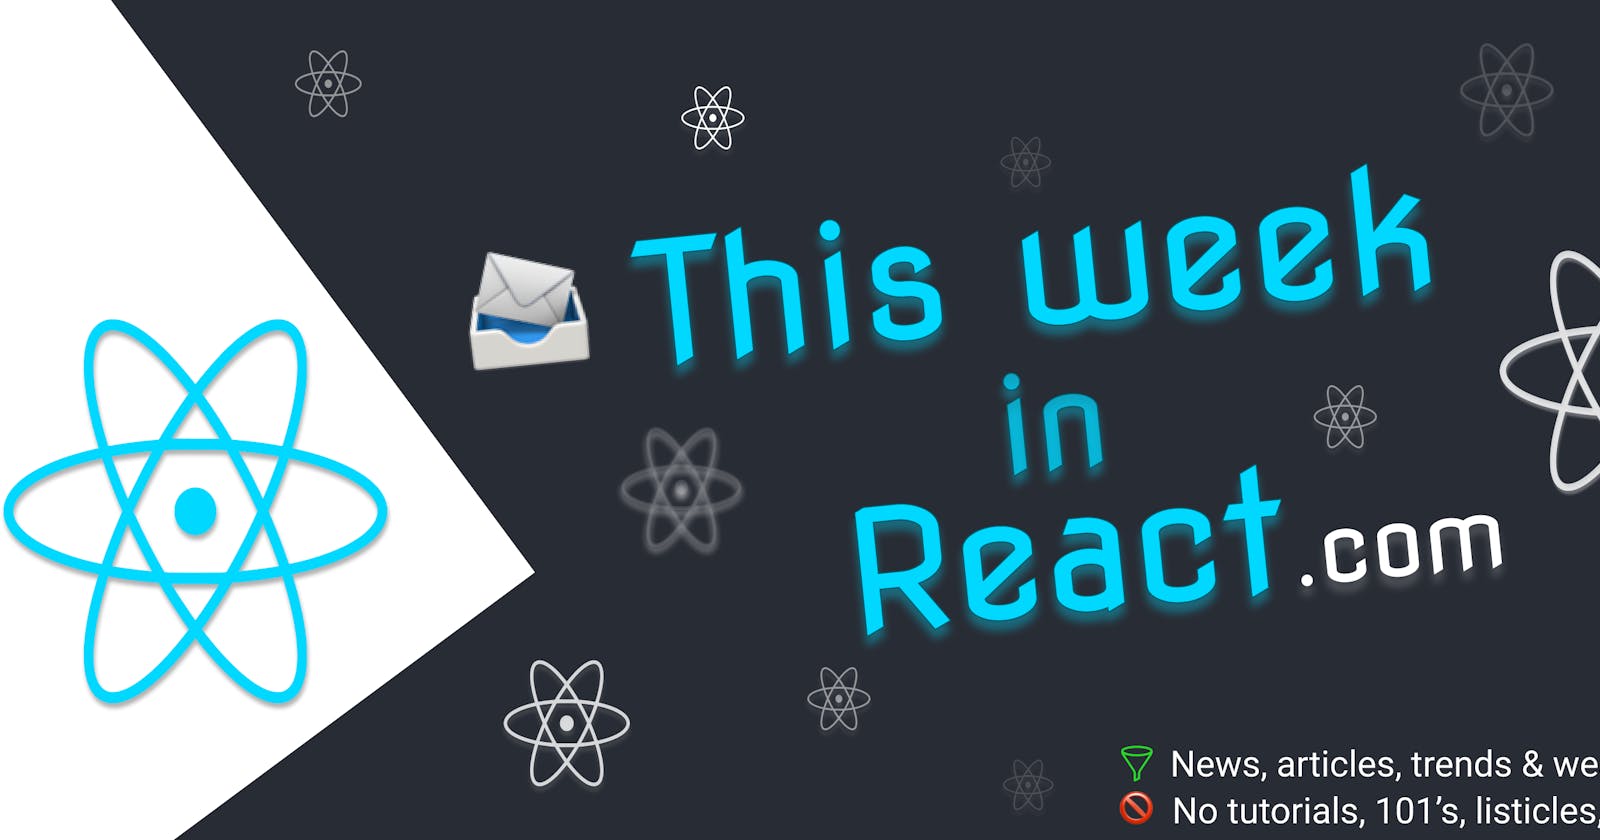 This Week In React#171: Expo, React Conf, React 19 preview, Next.js, Vocs, Skottie, Harmony, VisionOS...